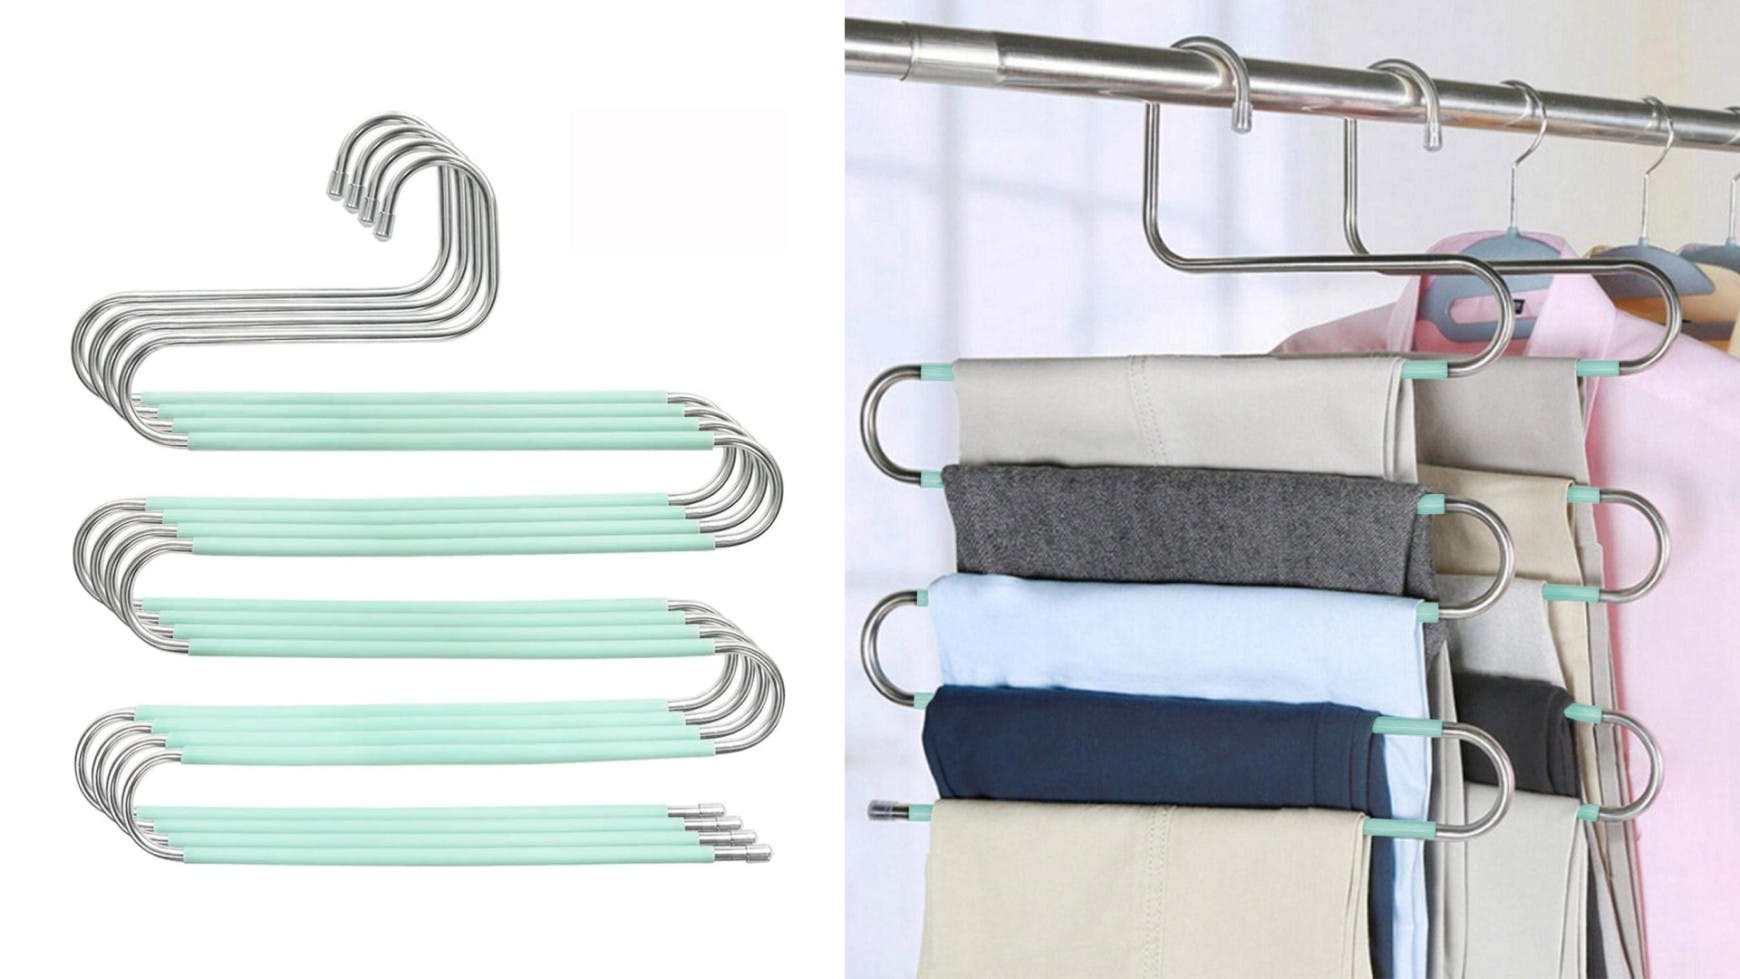 s-shaped hangers to gain more closet space